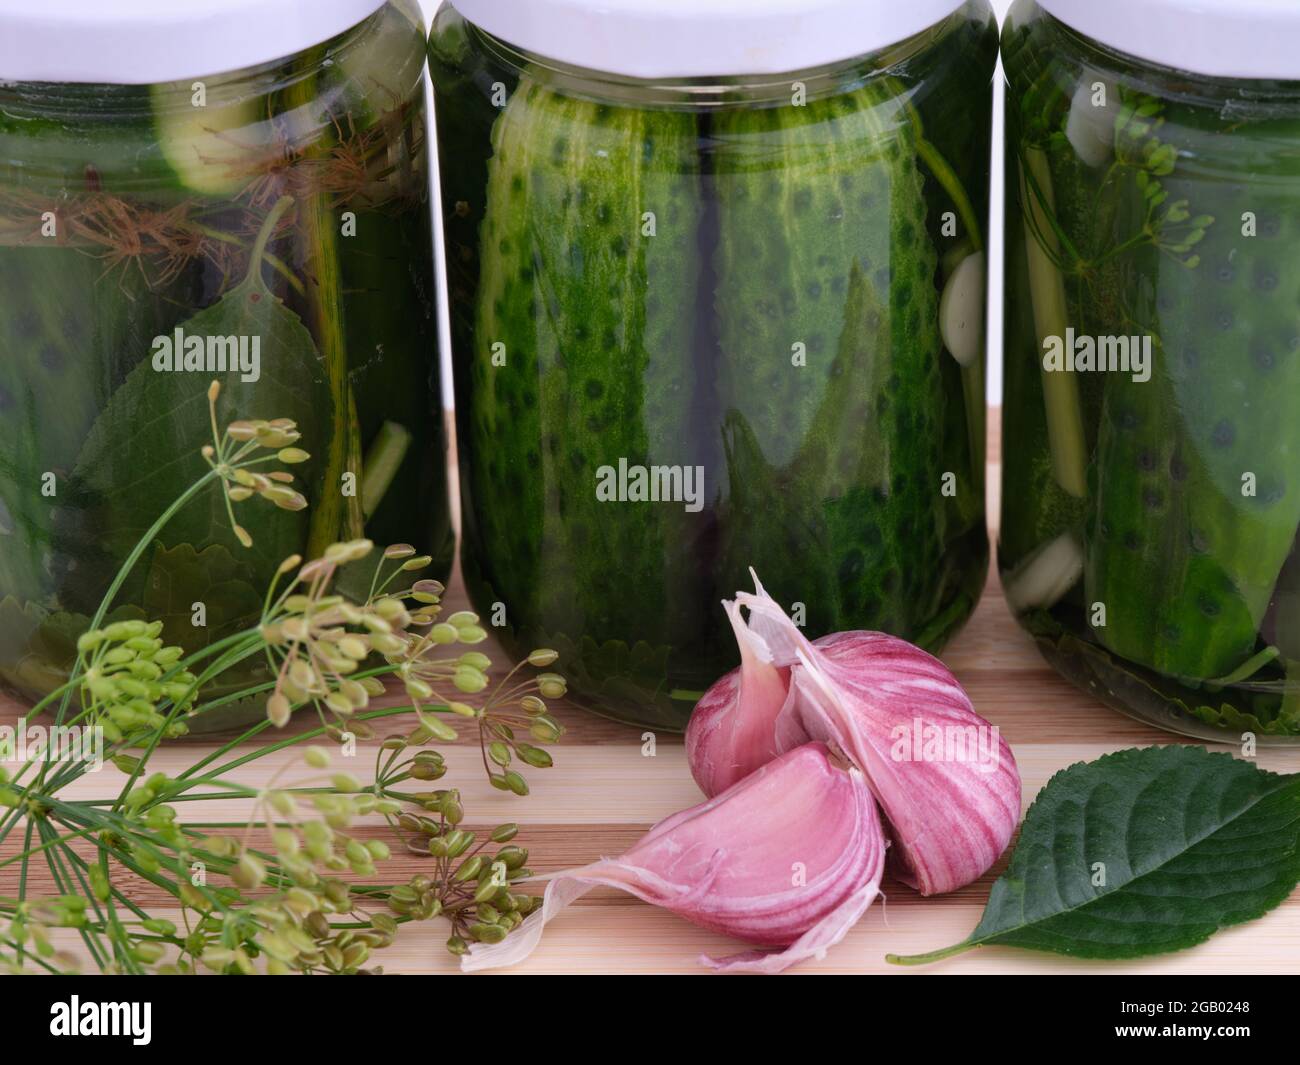 Homemade pickled cucumbers in a glass jars. Close up. Stock Photo